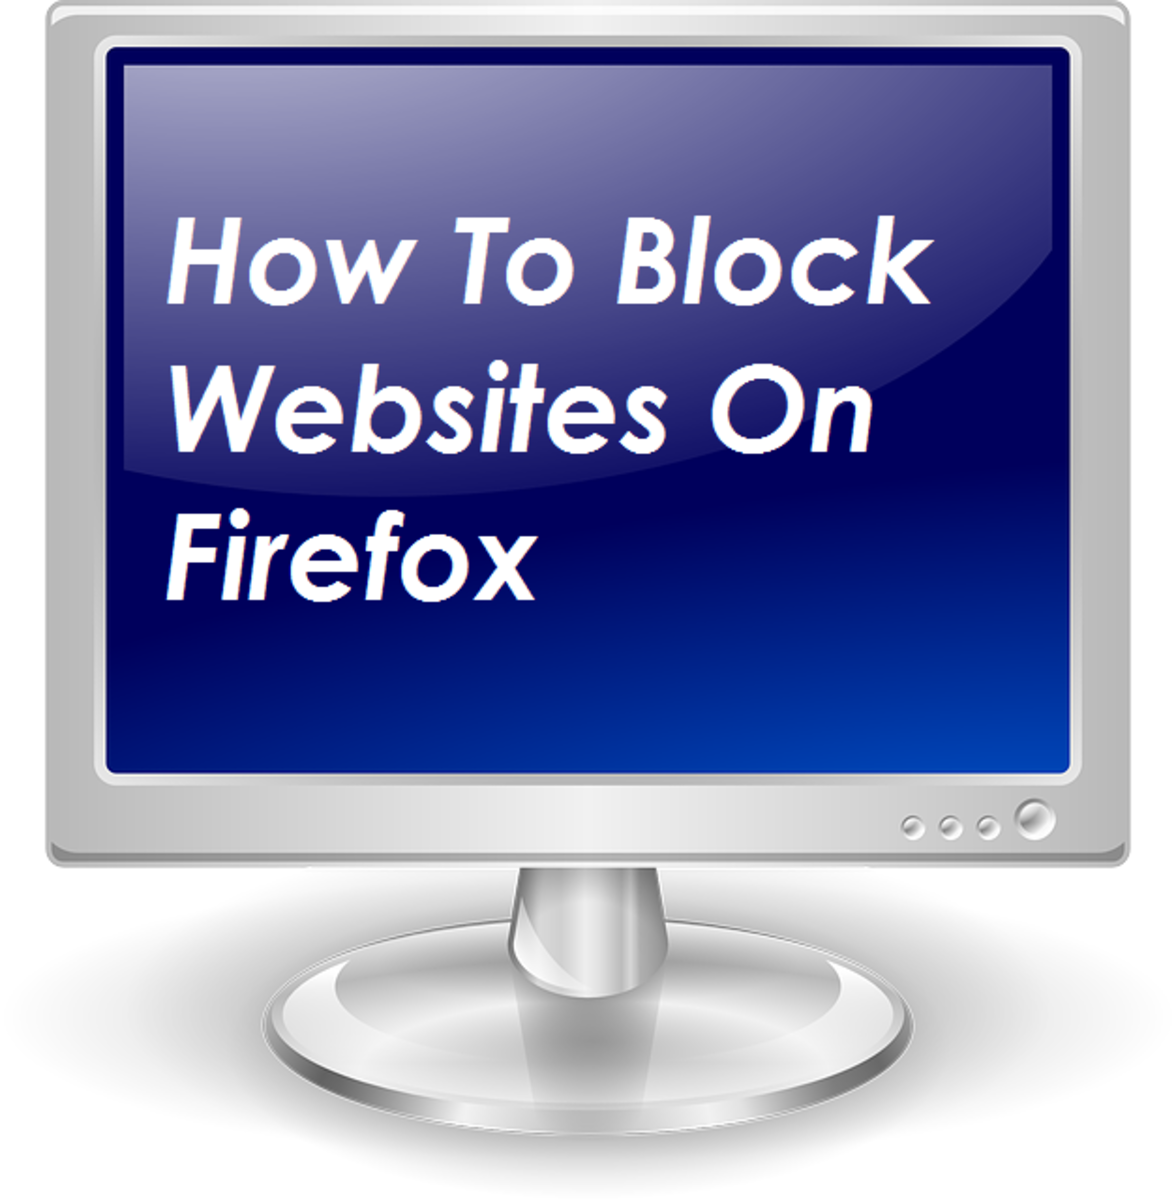 How To Block Websites On Firefox